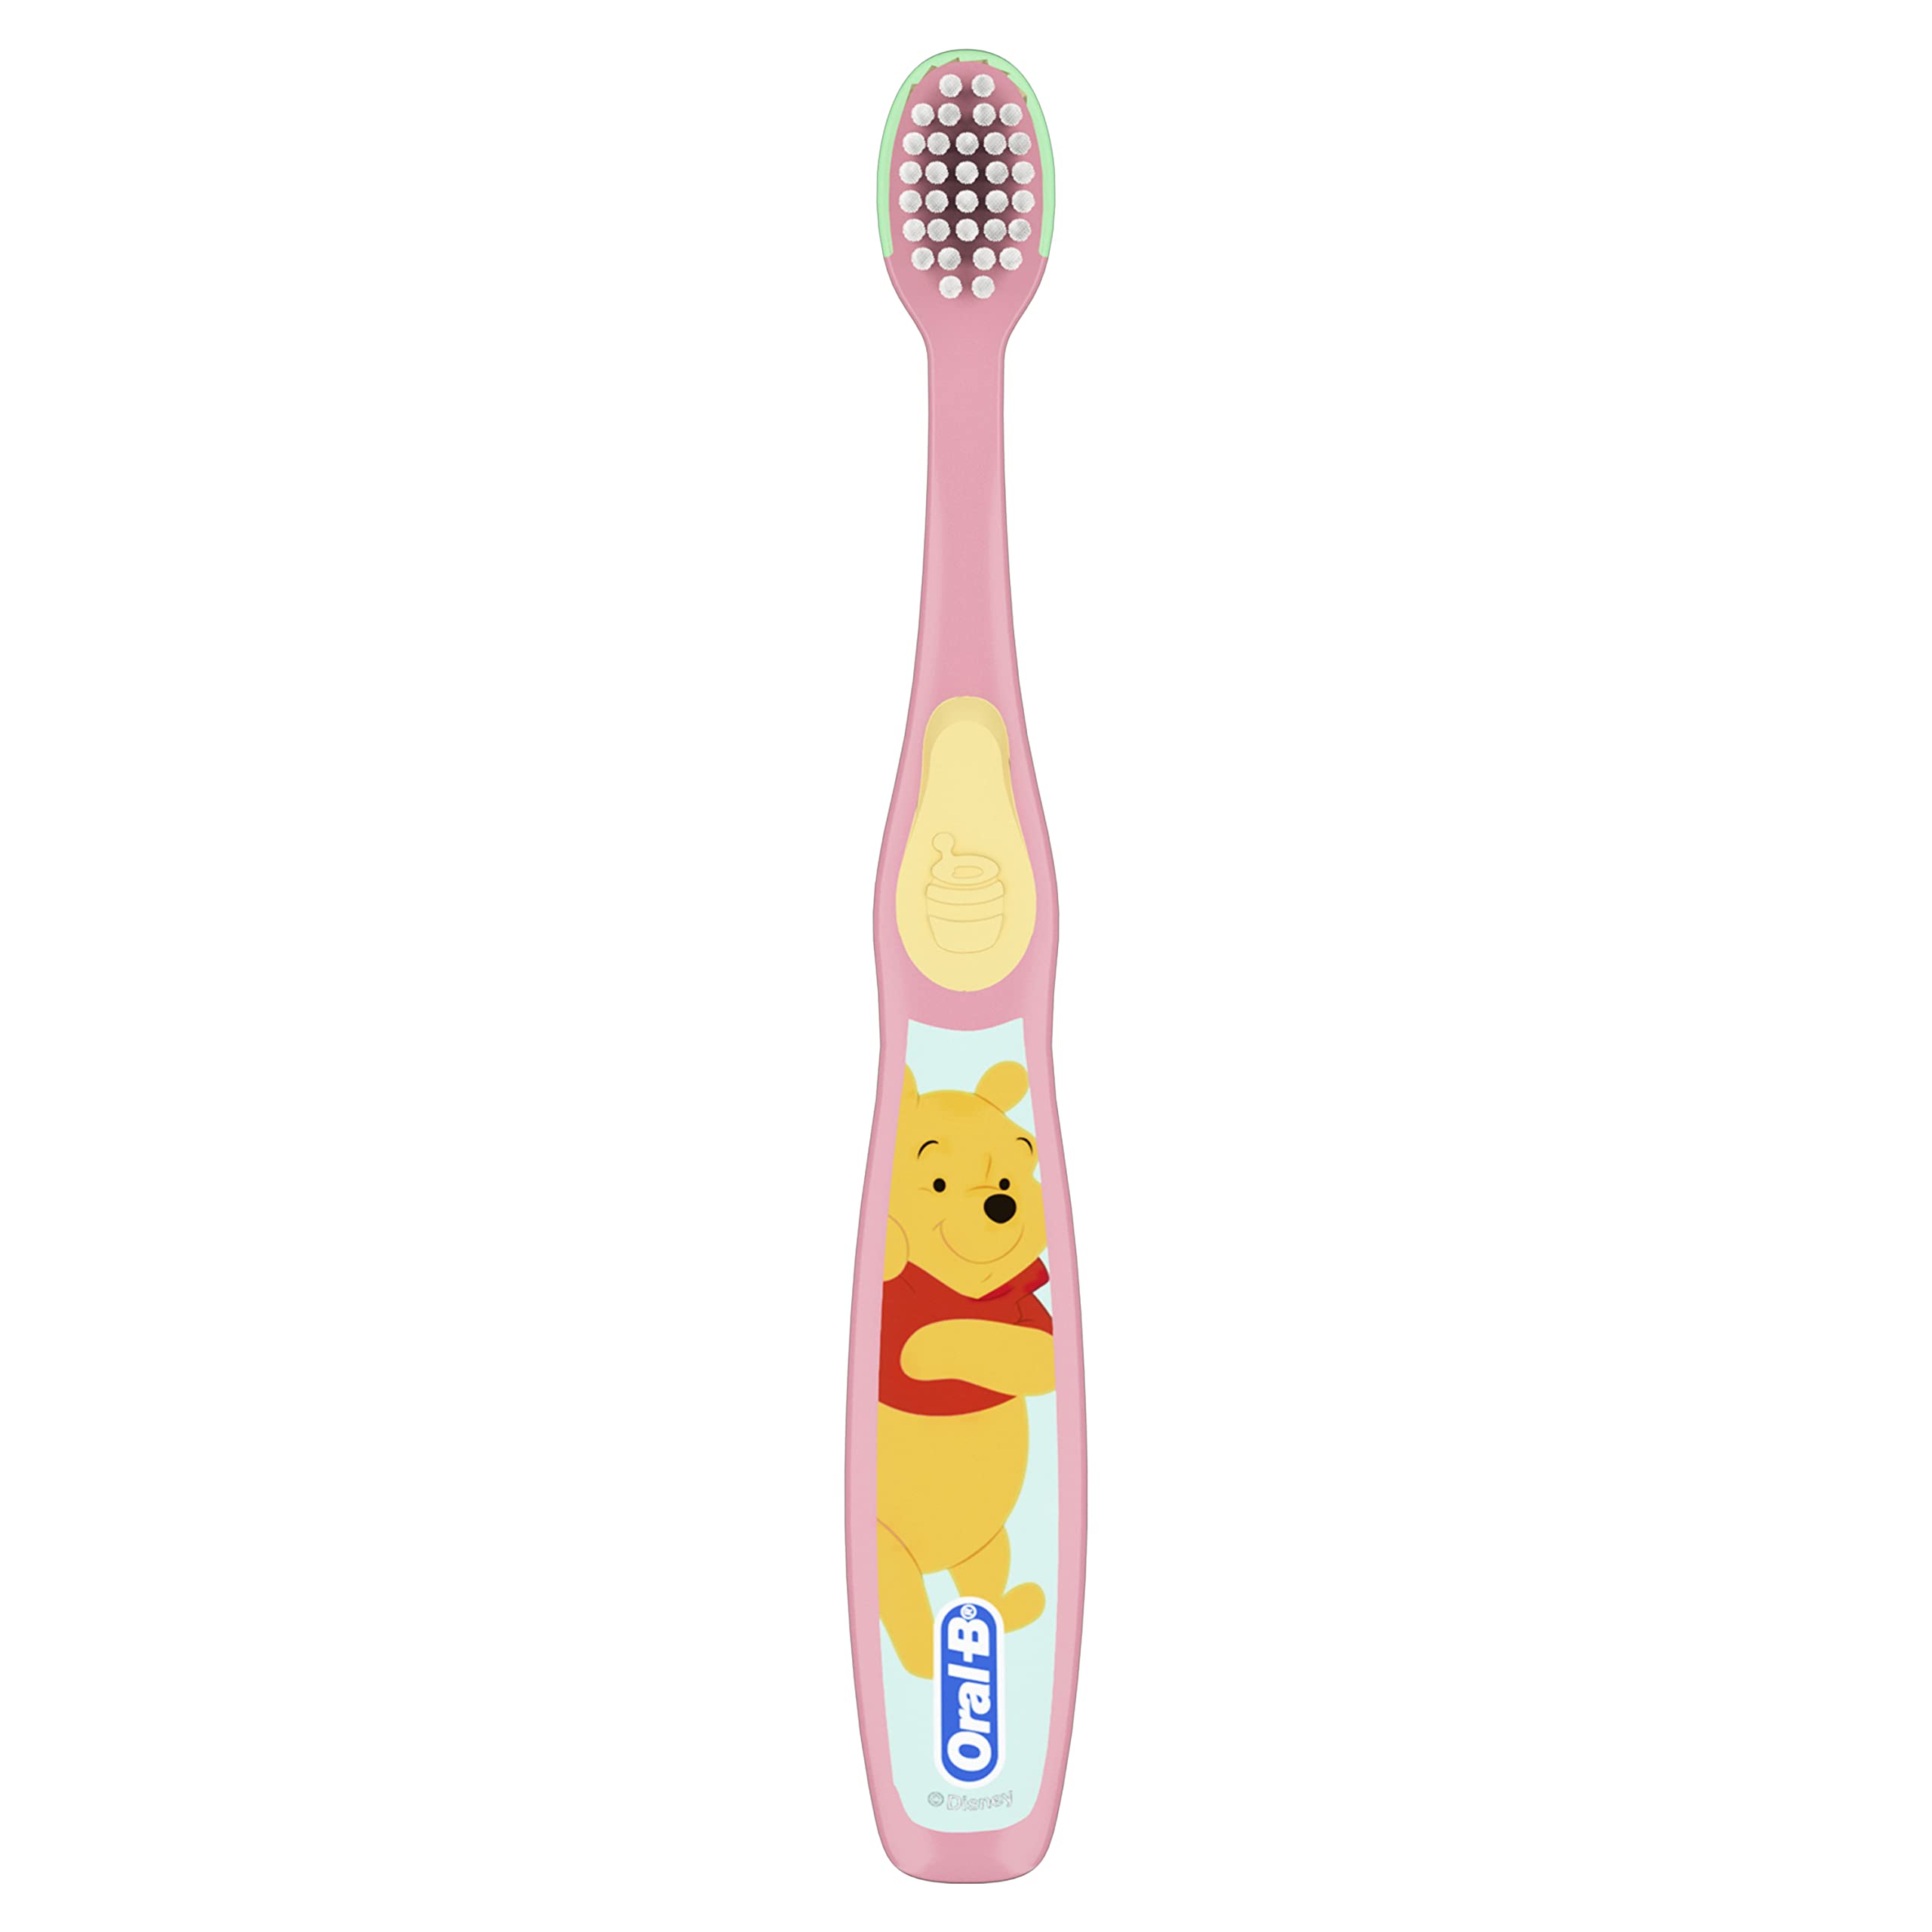 Oral-B Baby Toothbrush Featuring Disney's Pooh, Baby Soft Bristles, 0-3 Years, 1 Count